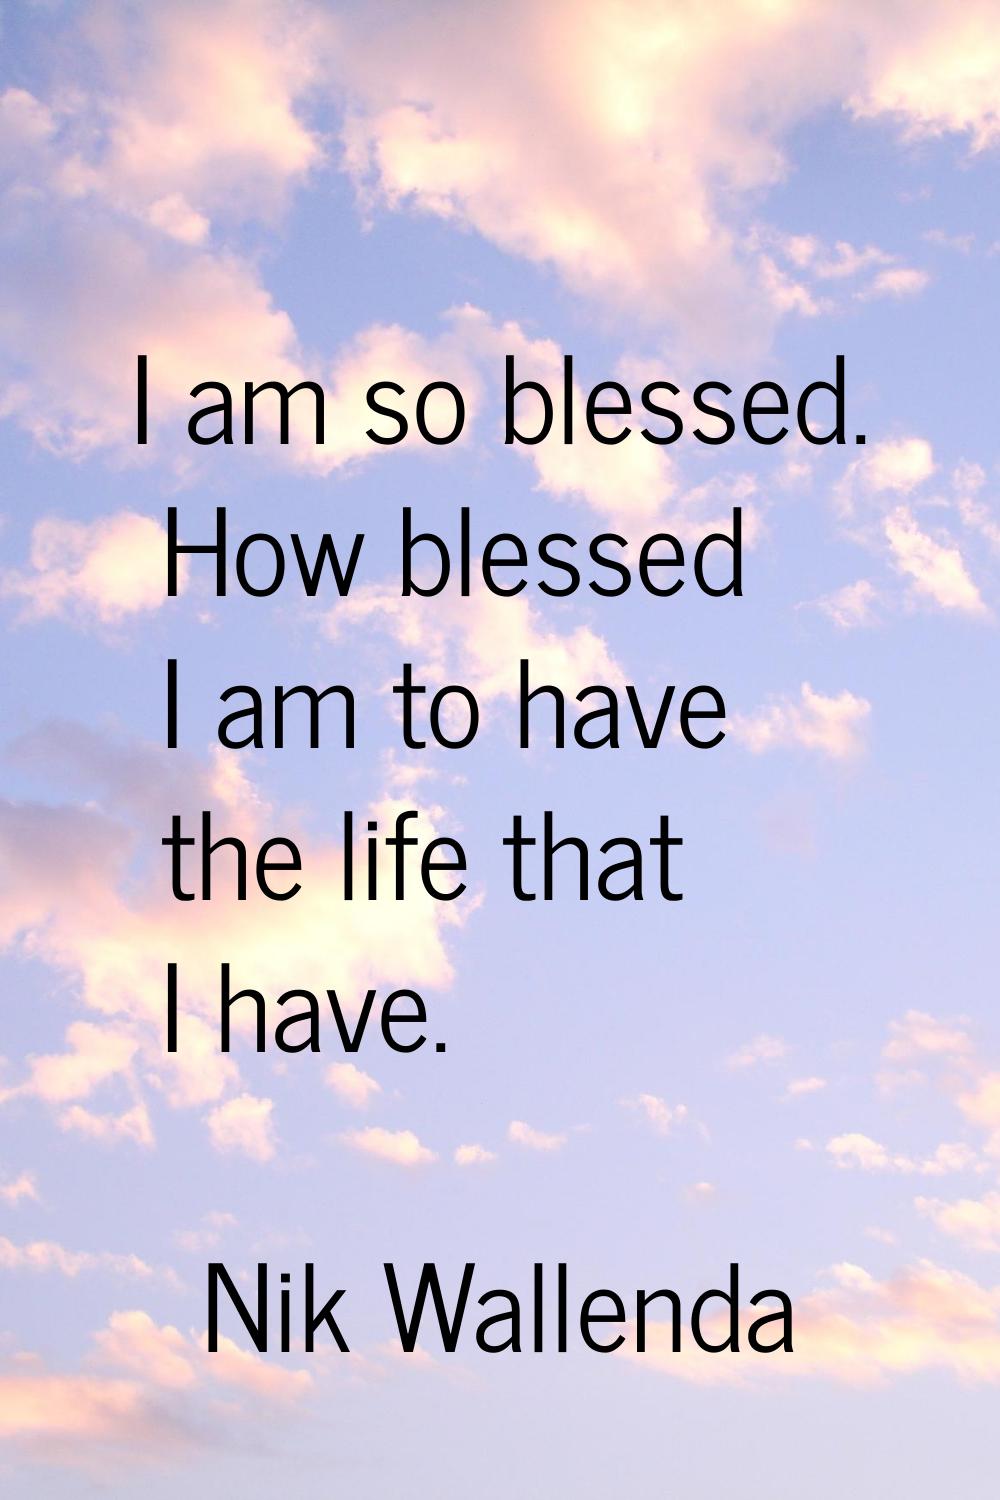 I am so blessed. How blessed I am to have the life that I have.